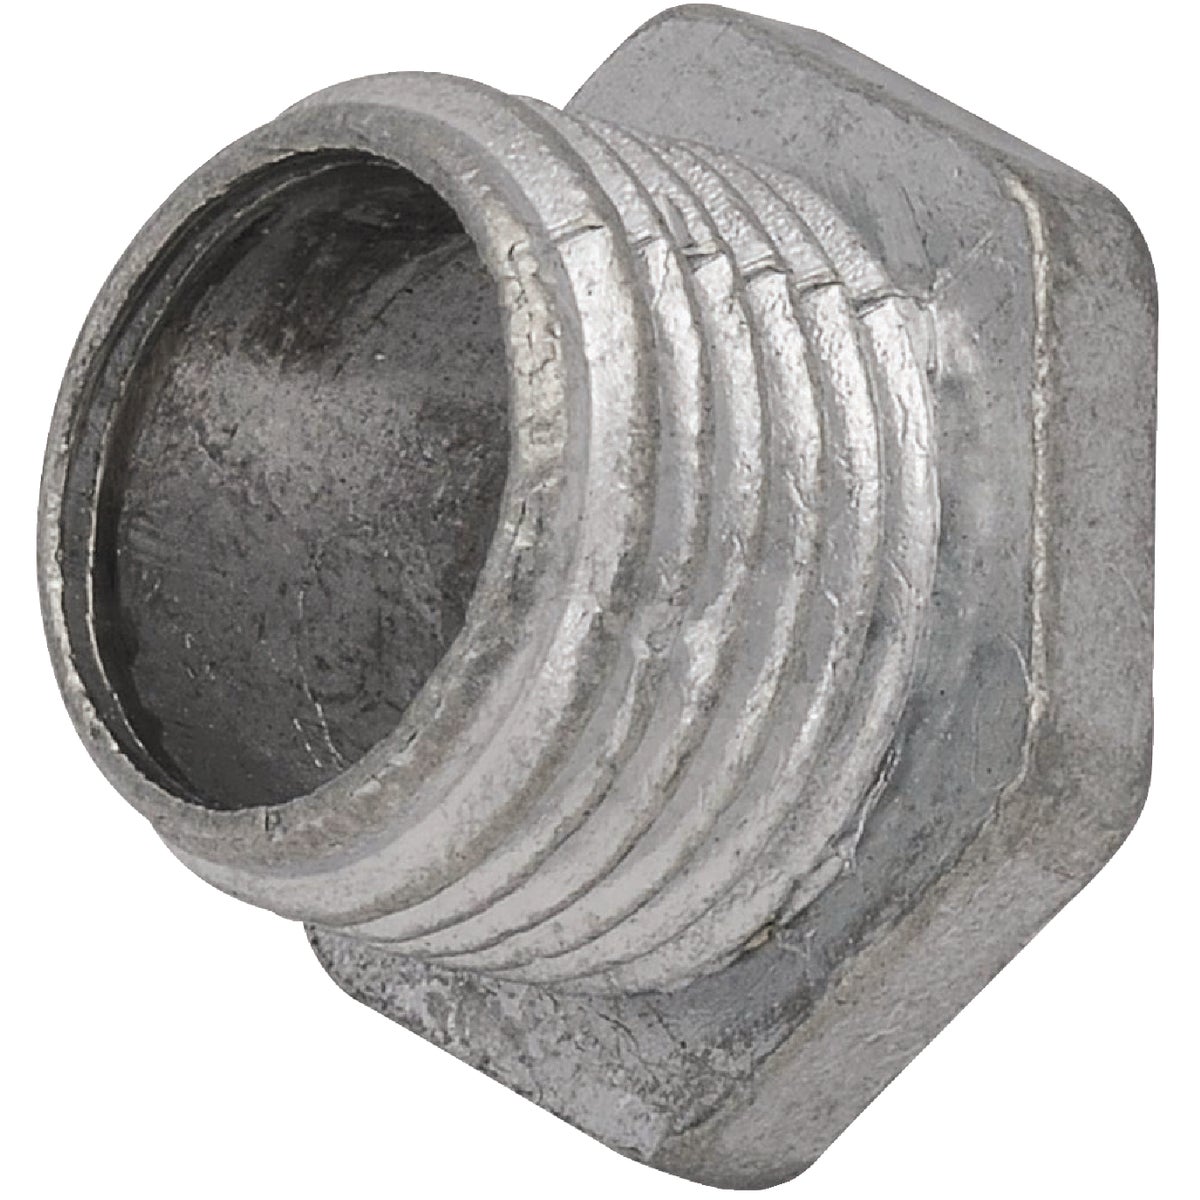 Southwire Madison Electric 1/2 In. Rigid Zinc Die-Cast Speed Conduit Nipple (100-Pack)